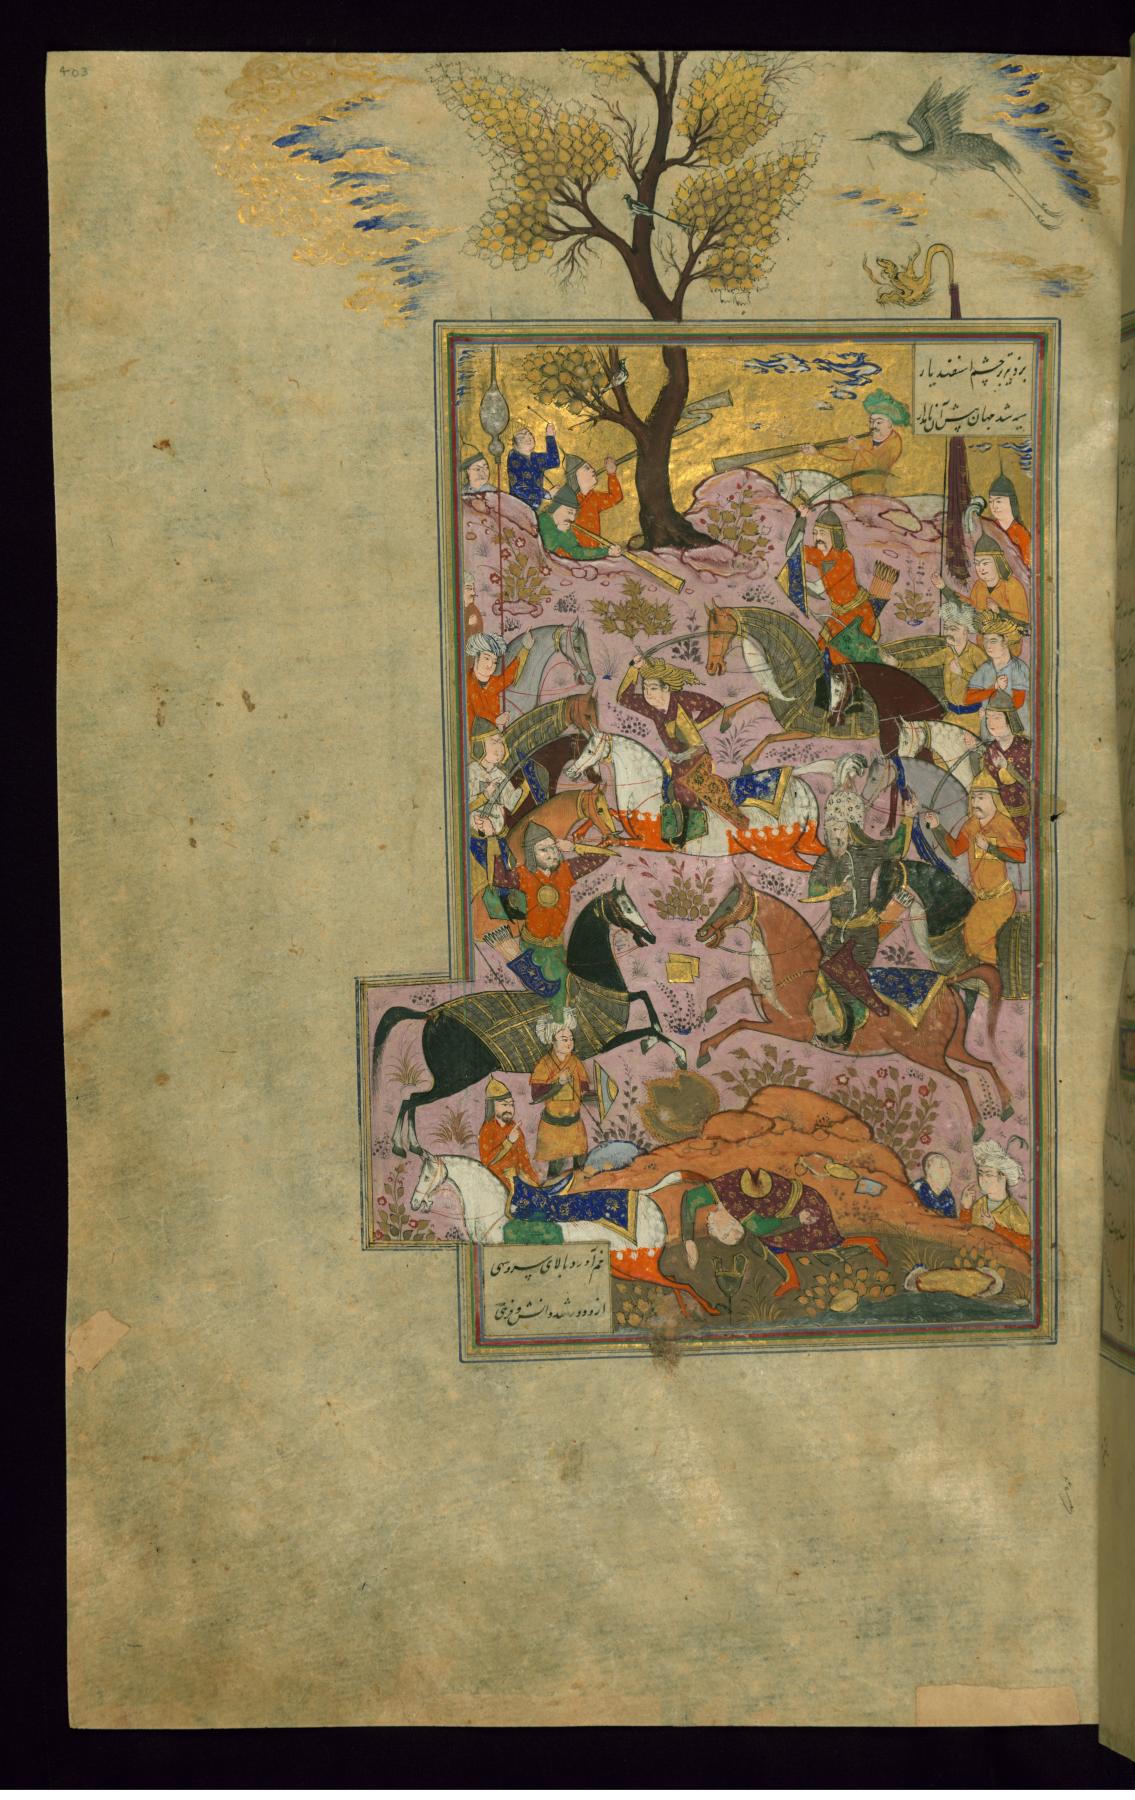 Rustam Shoots Isfandiyar In The Eyes With A Double-pointed Arrow